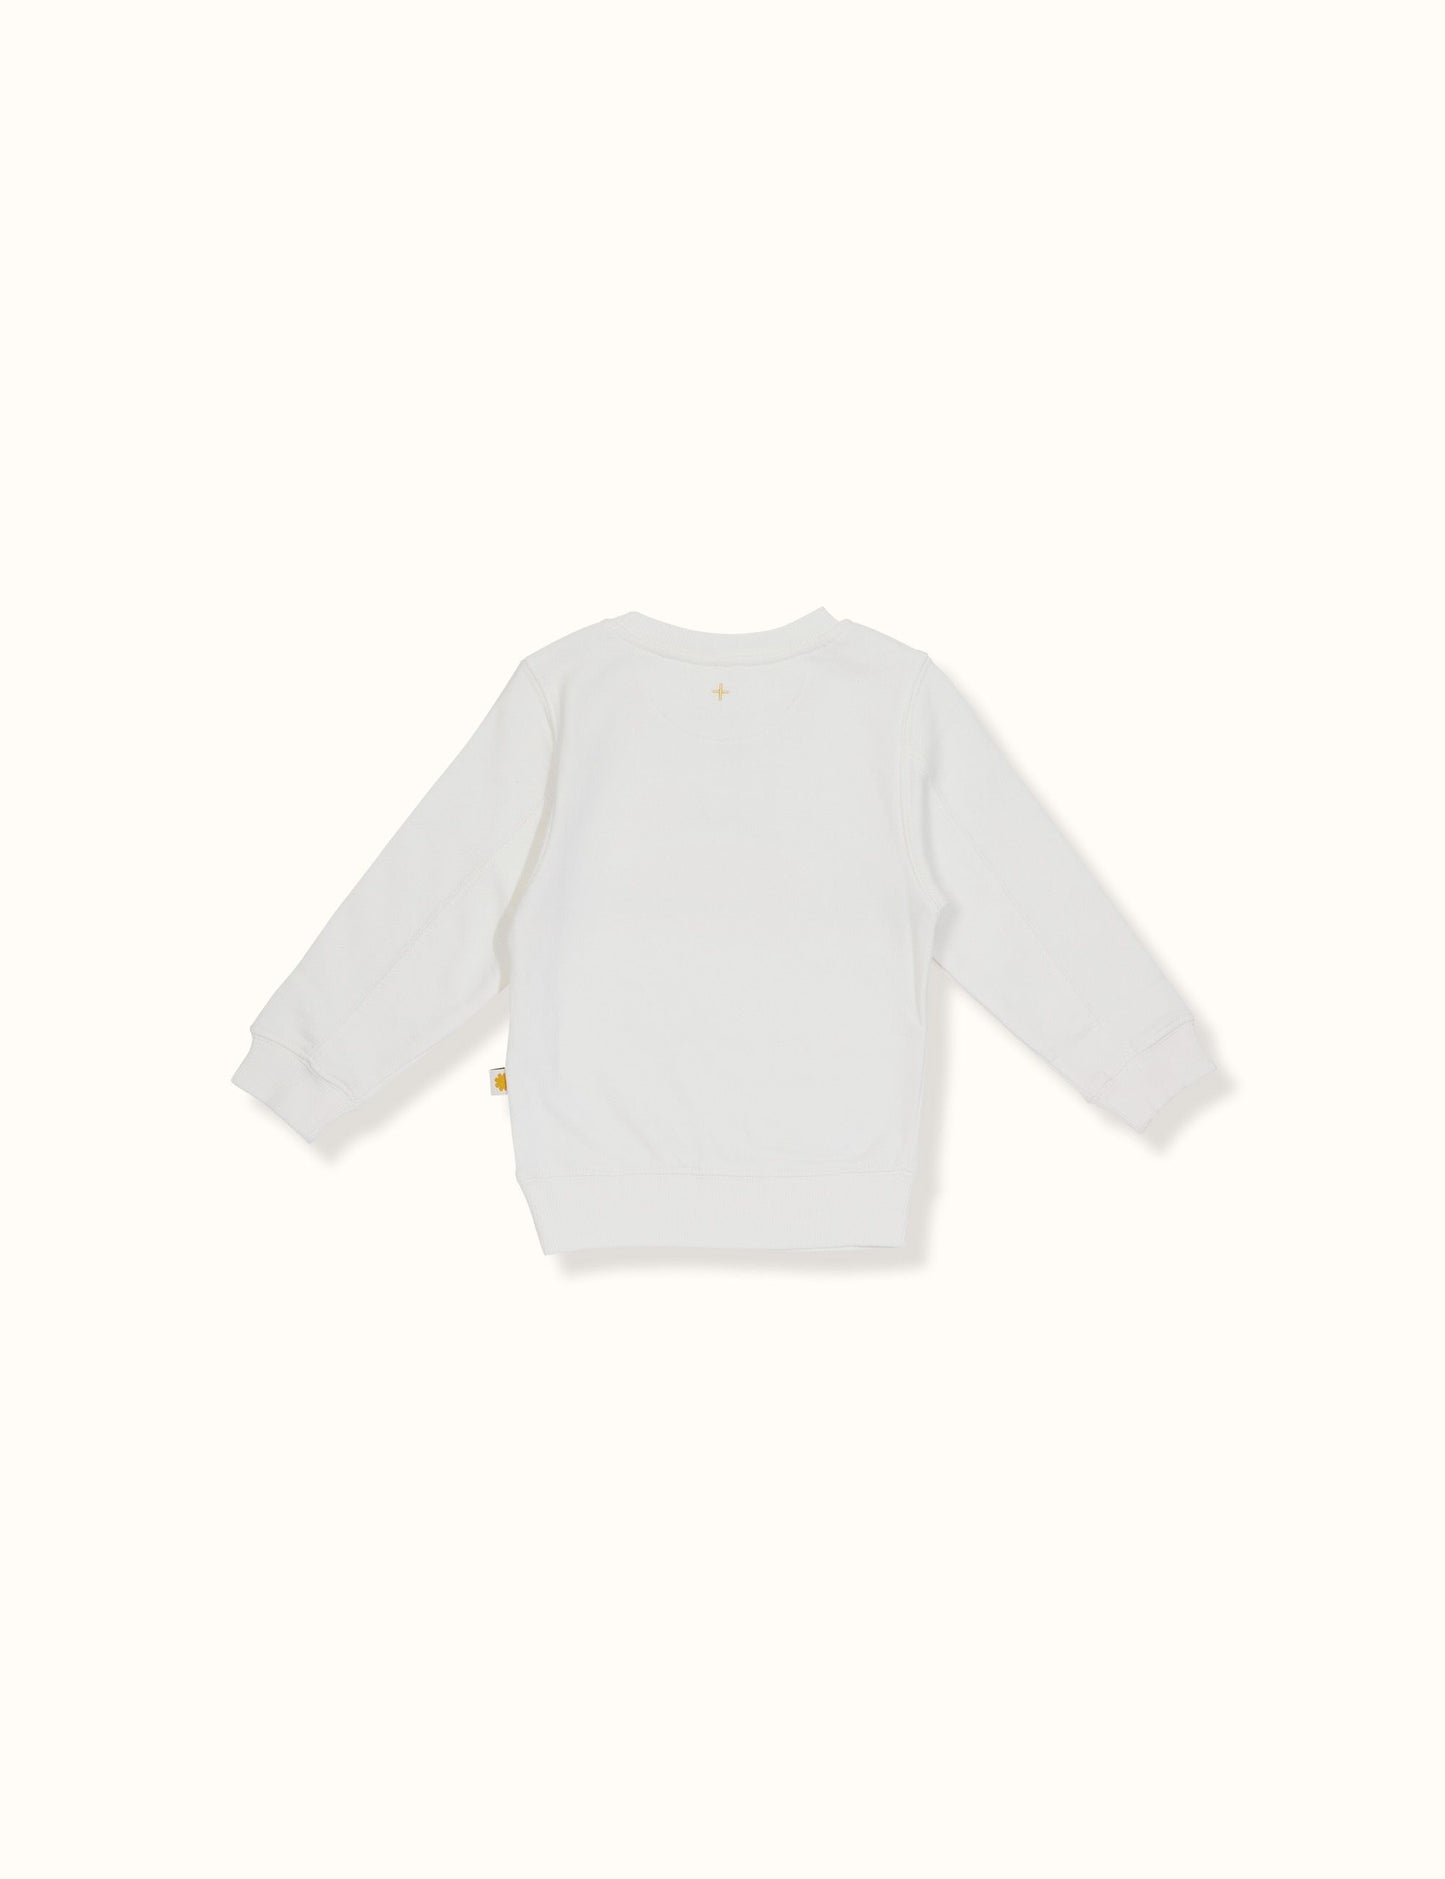 Goldie + Ace - Australia Relaxed Sweater (Antique White)